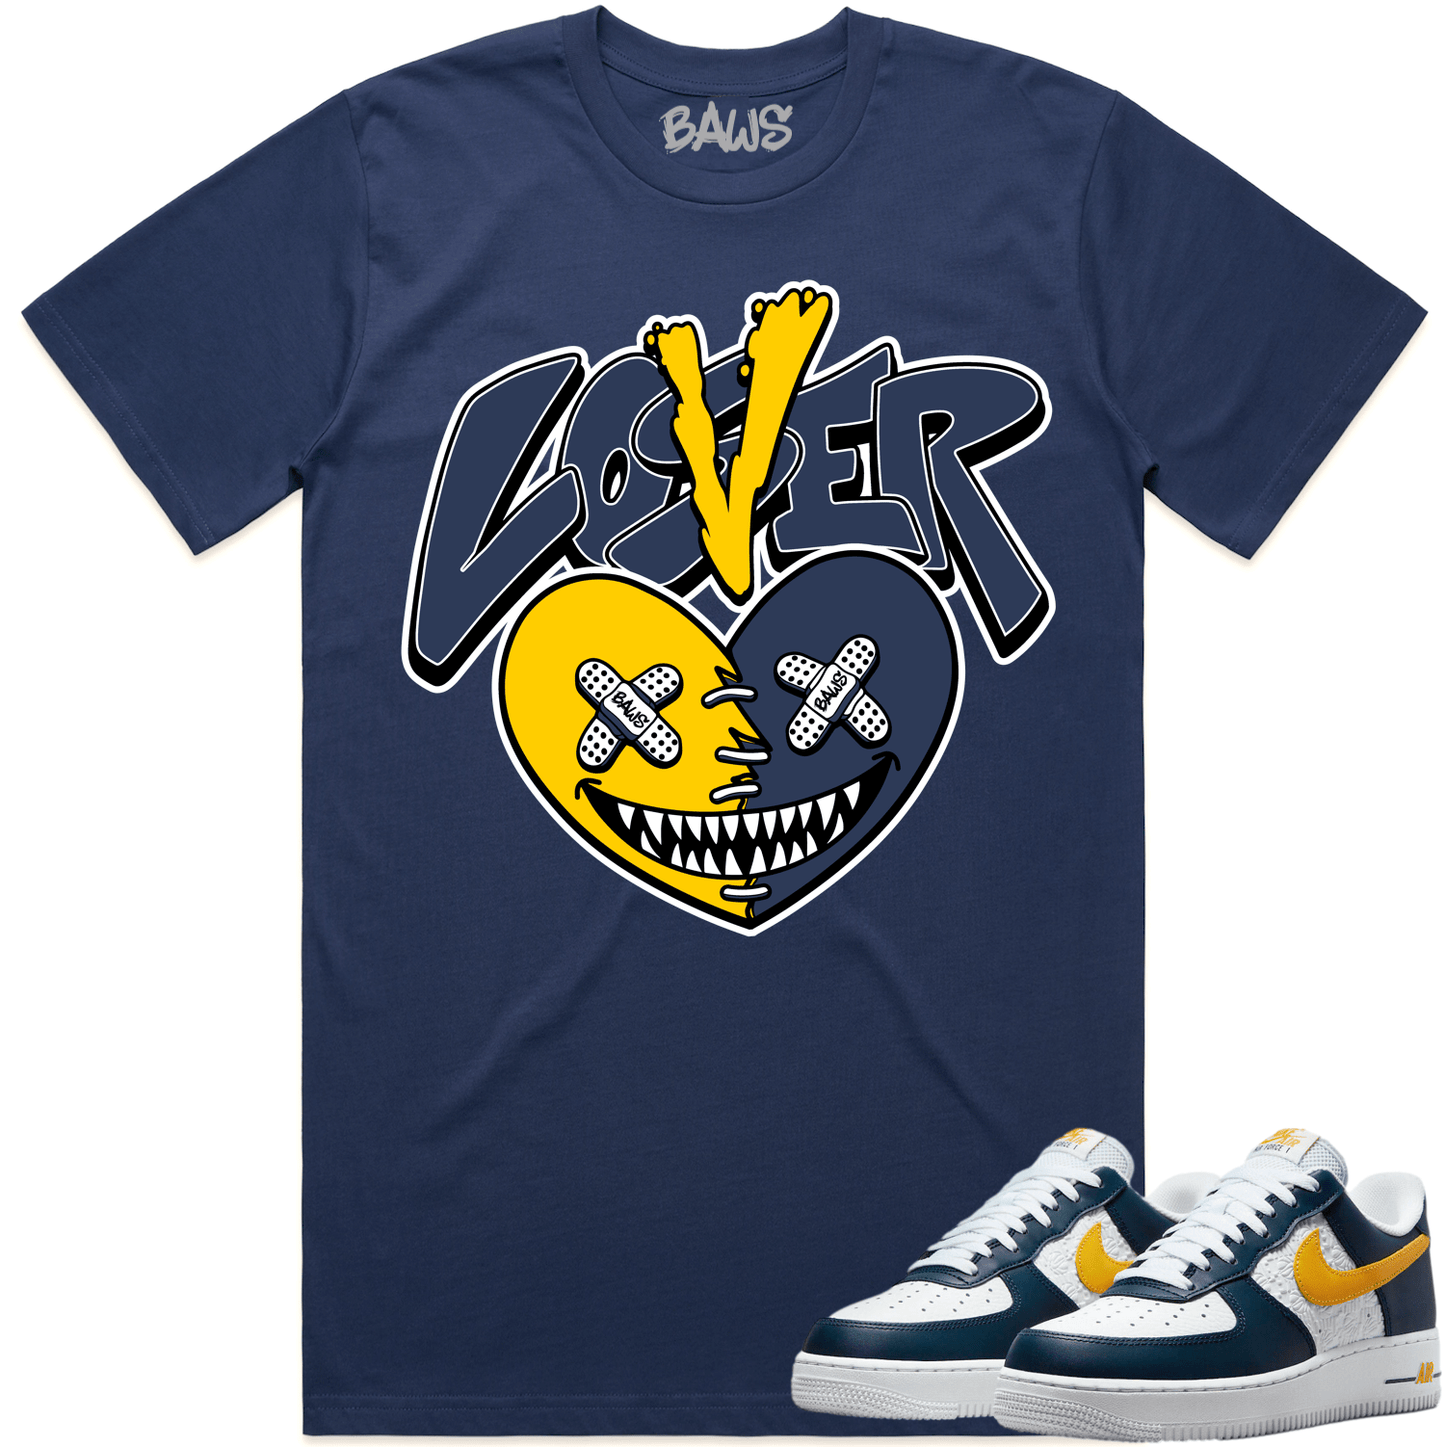 Air Force One Michigan Shirt - AF1s Sneaker Tees - Lover Loser Baws